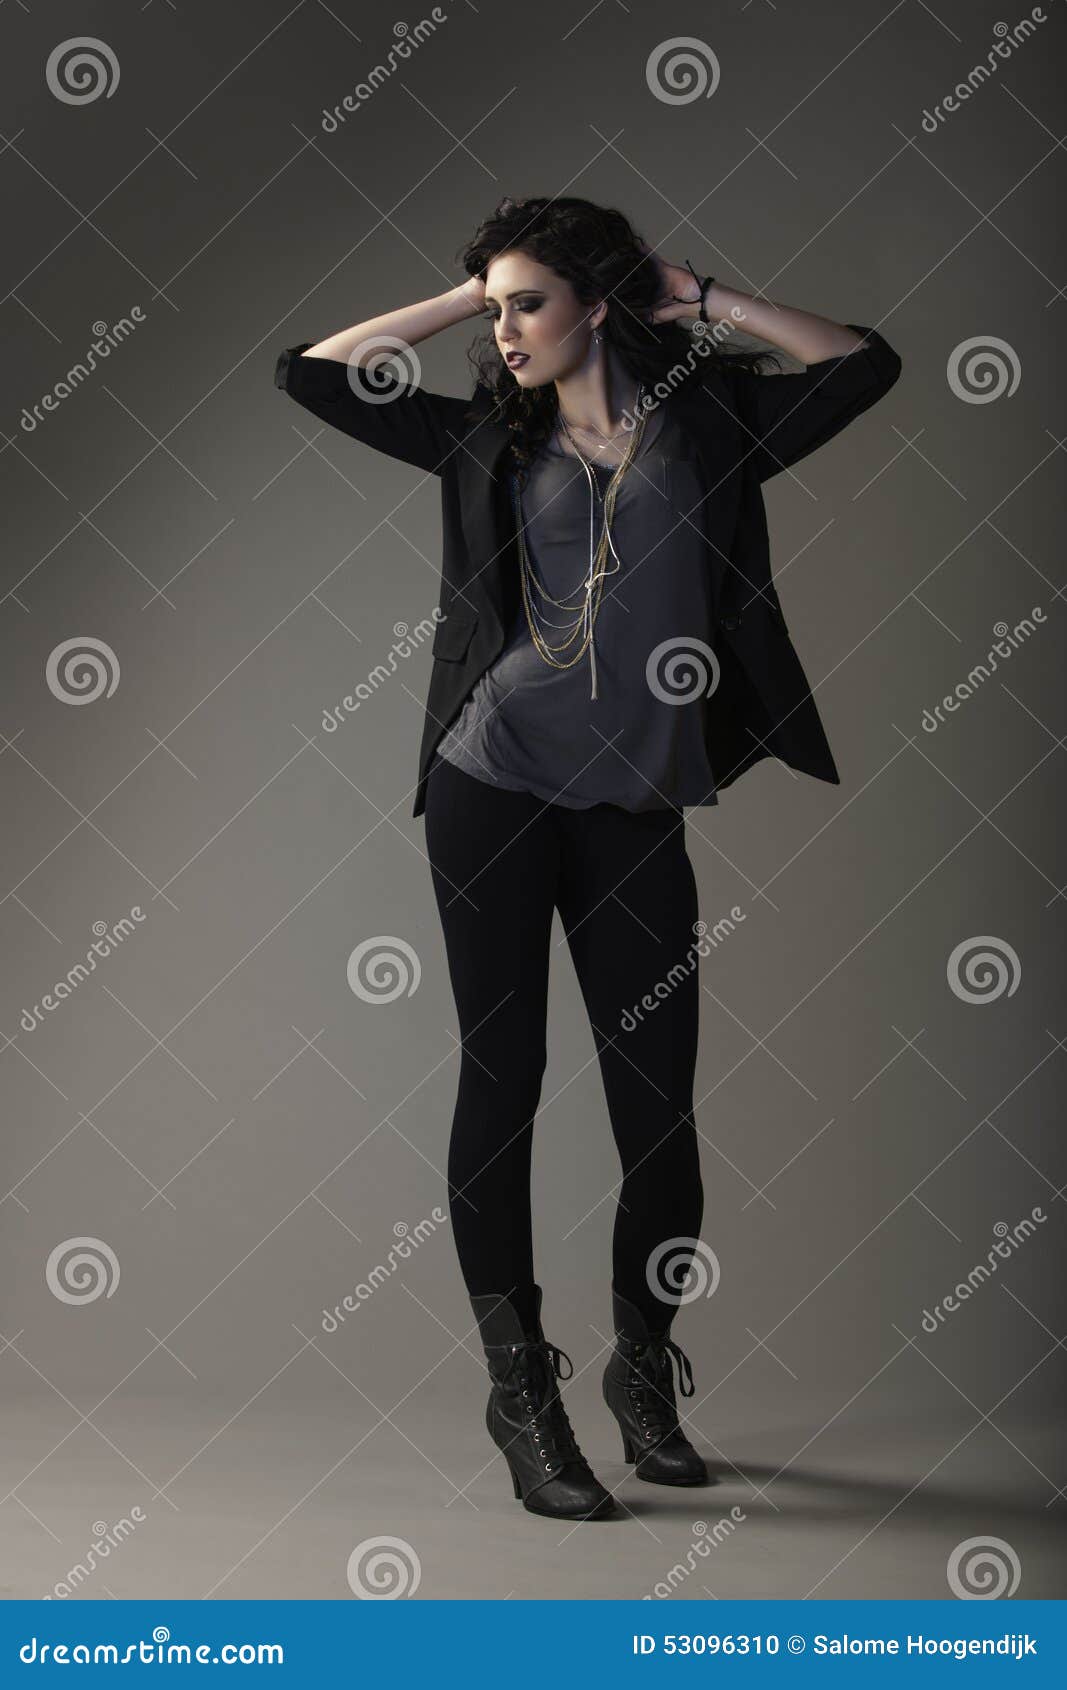 rocker girl wearing edgy outfit and makeup